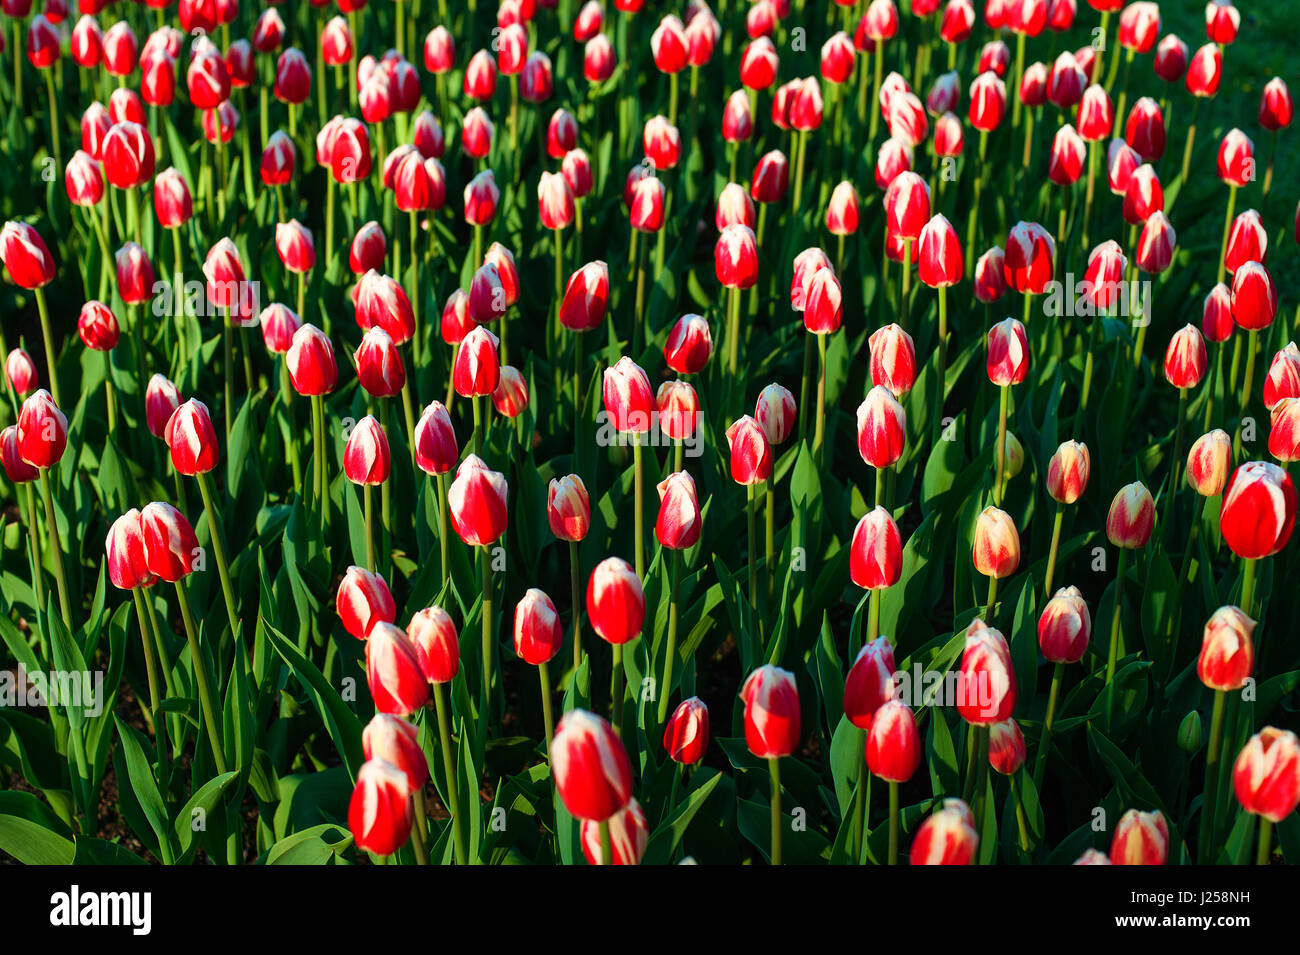 red tulips, green grass Stock Photo